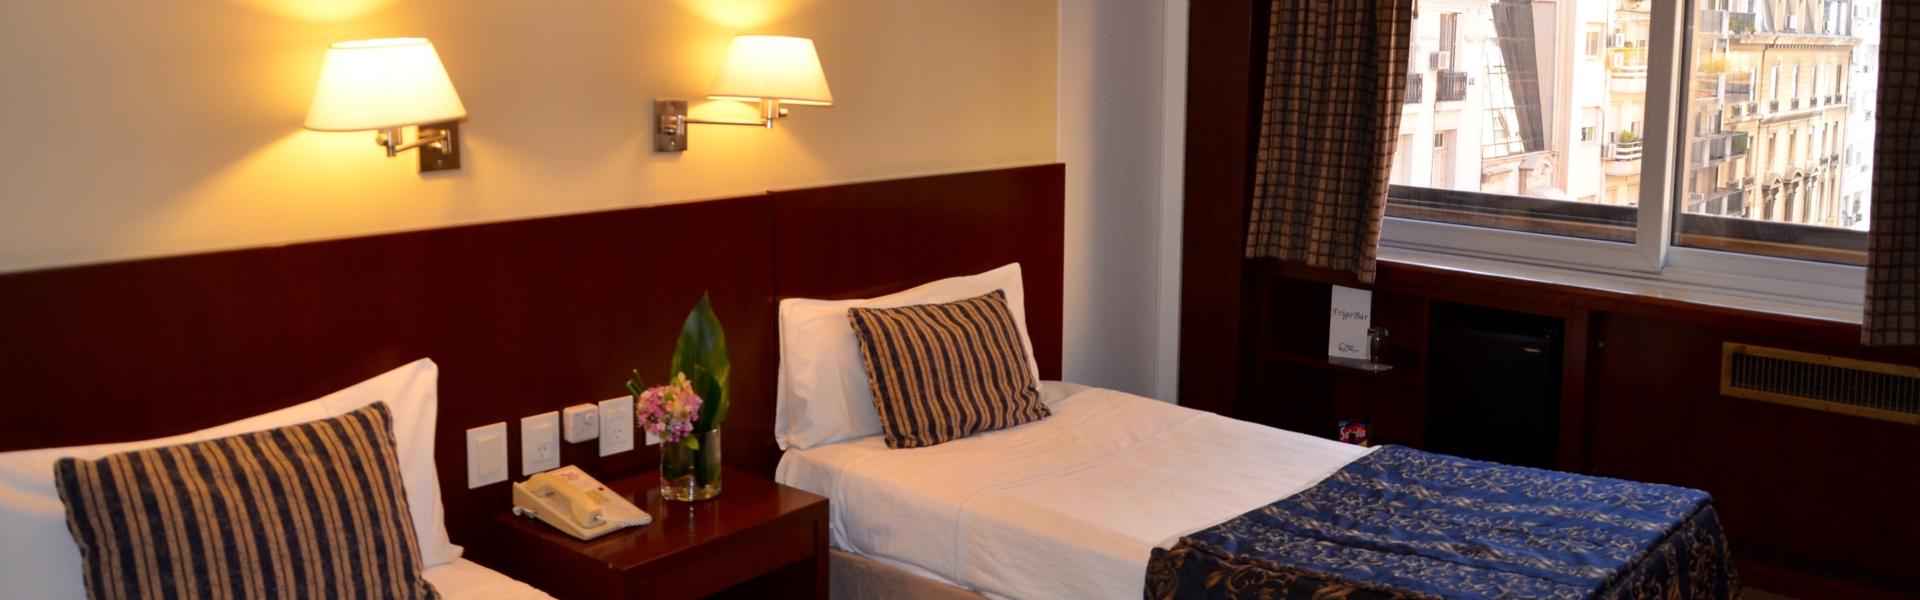 Reserve your room in the center of Buenos Aires and start getting to know the city from our hotel!